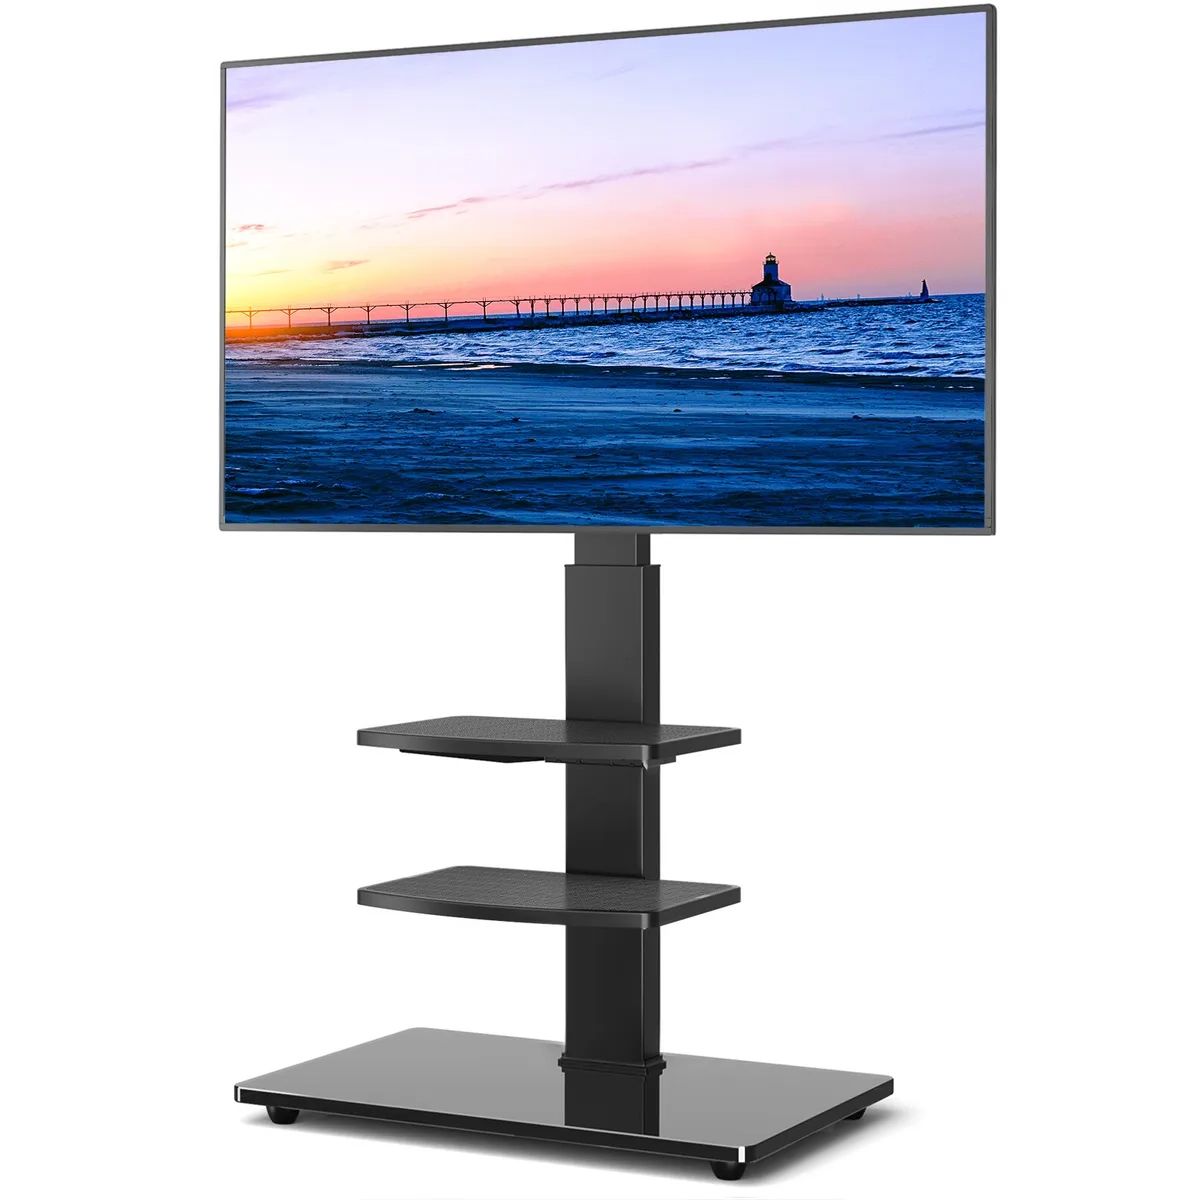 Universal Floor Tv Stand With Swivel Mount For 32" 65"flat Screen Tv | Ebay Pertaining To Universal Floor Tv Stands (View 8 of 20)